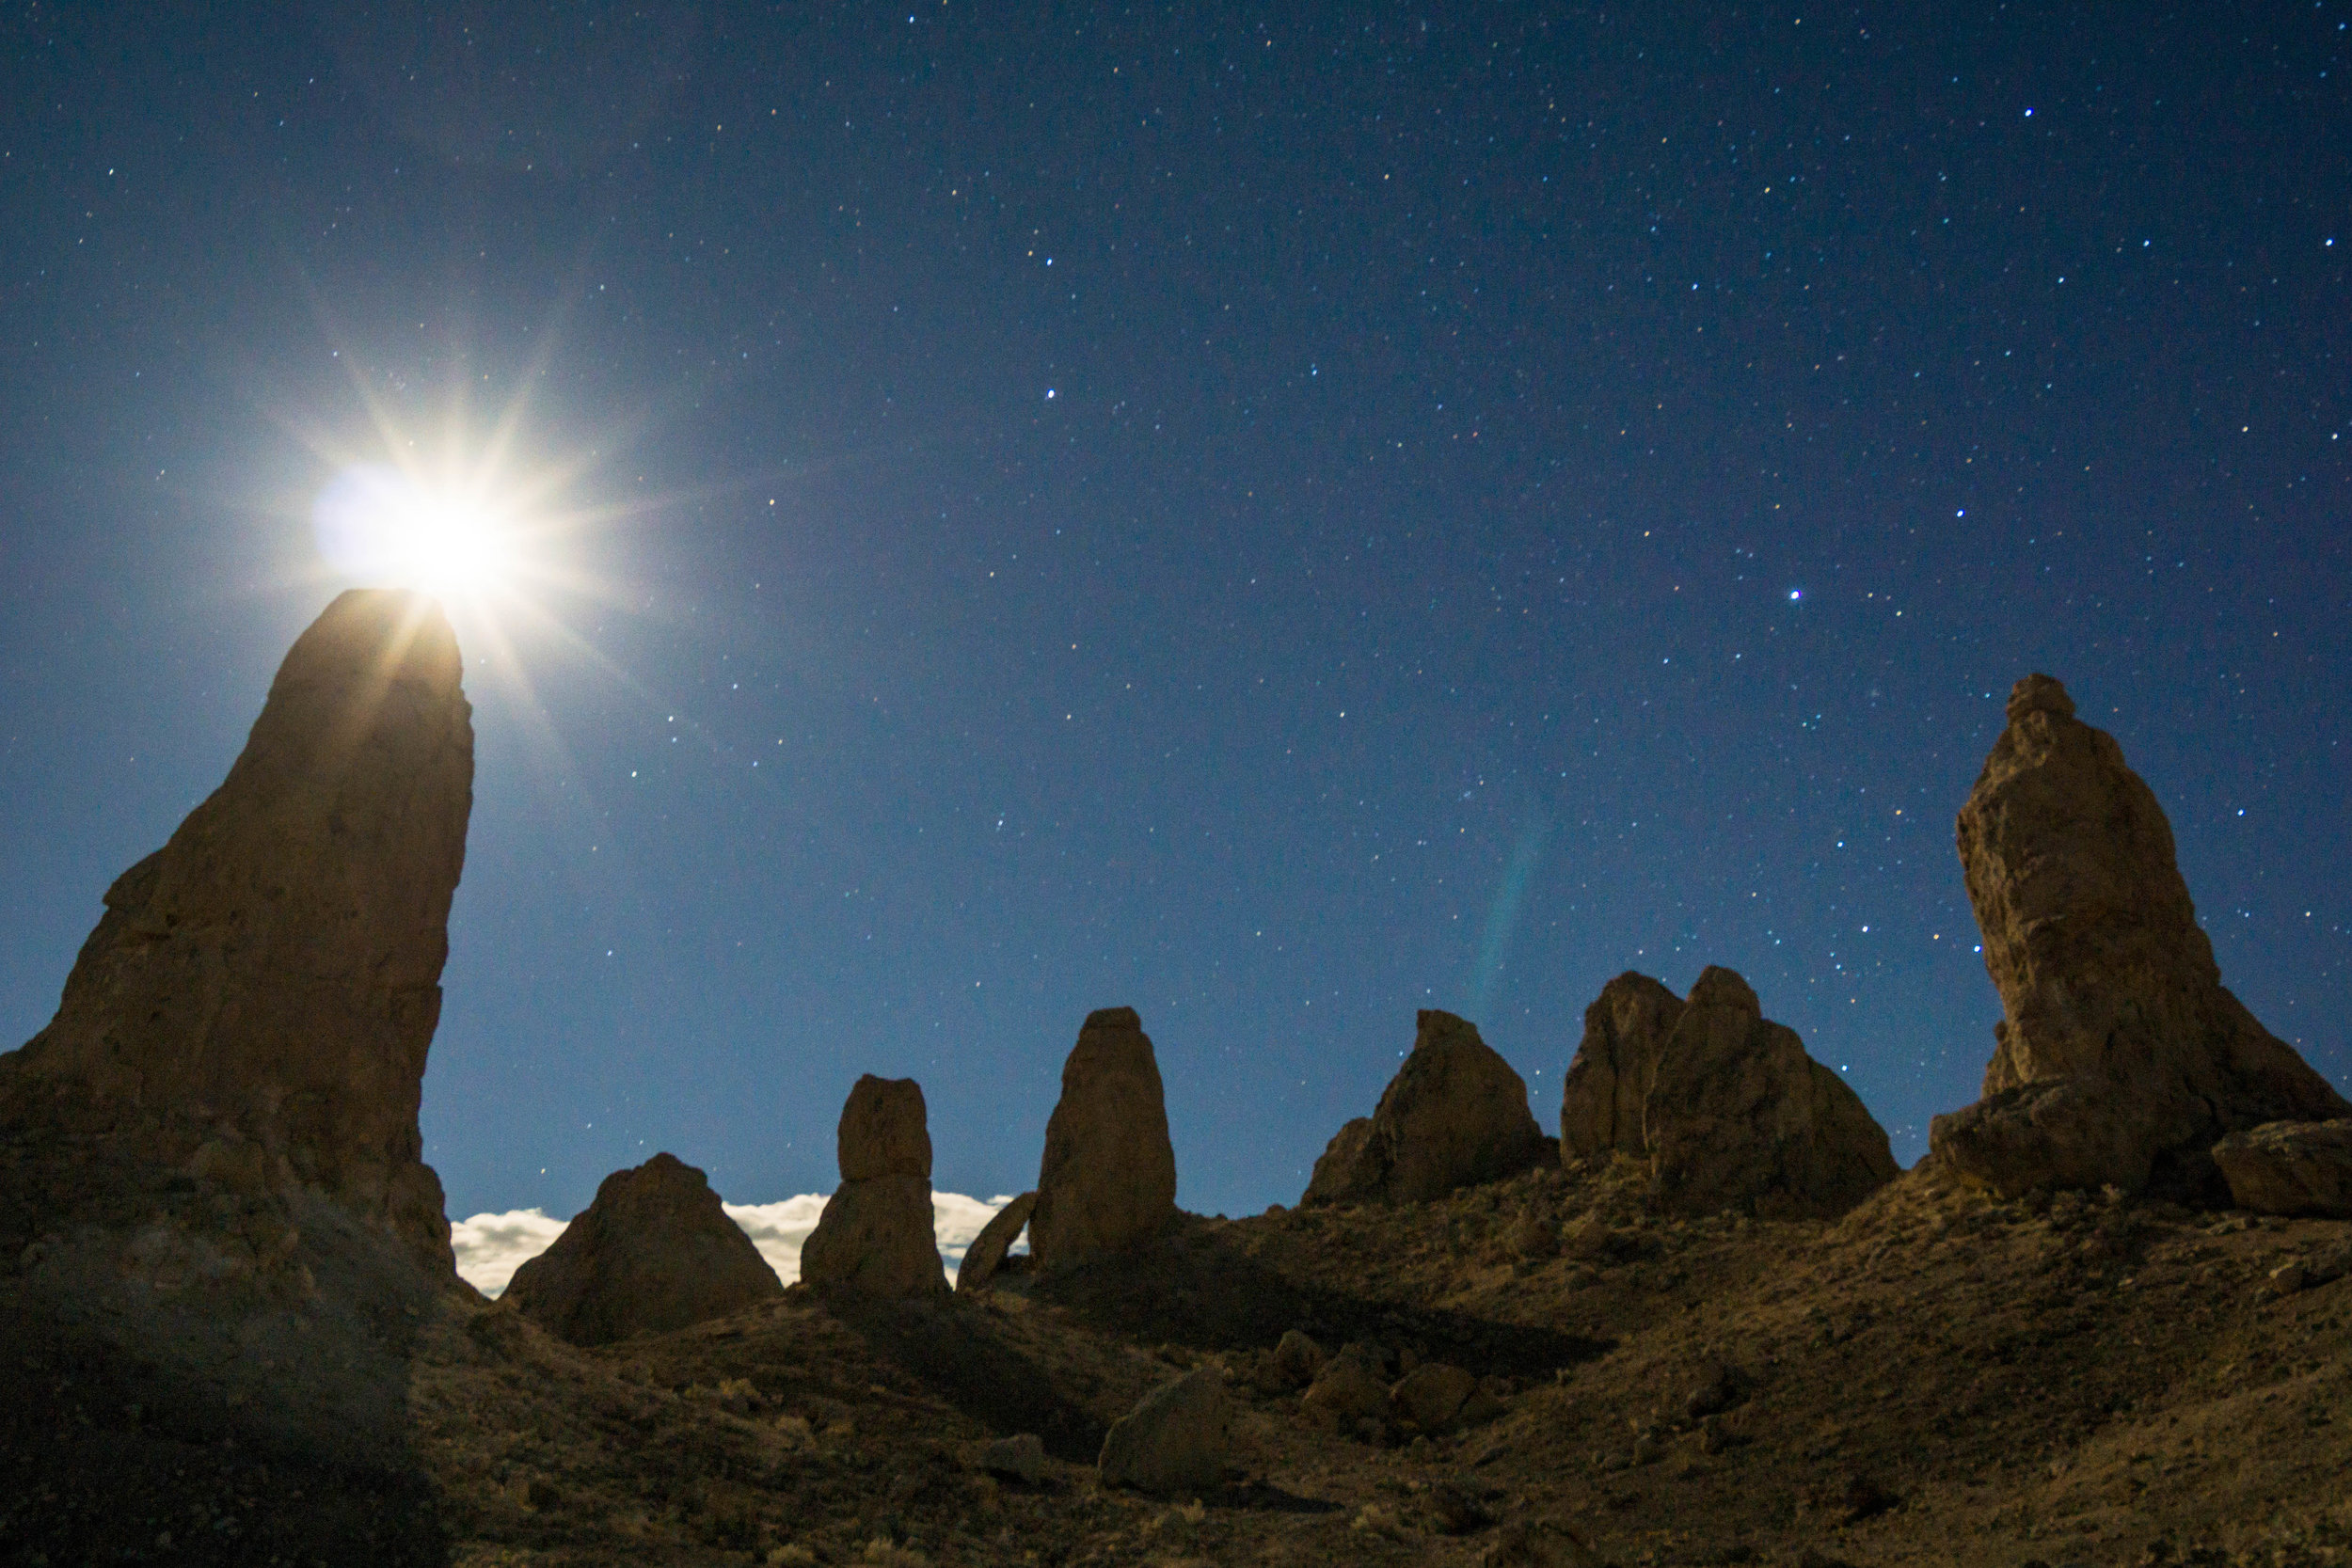 After struggling to set up camp in an unrelenting wind, we embark on a hike under the moonlight through an array of pinnacles formed beneath an ancient inland sea.